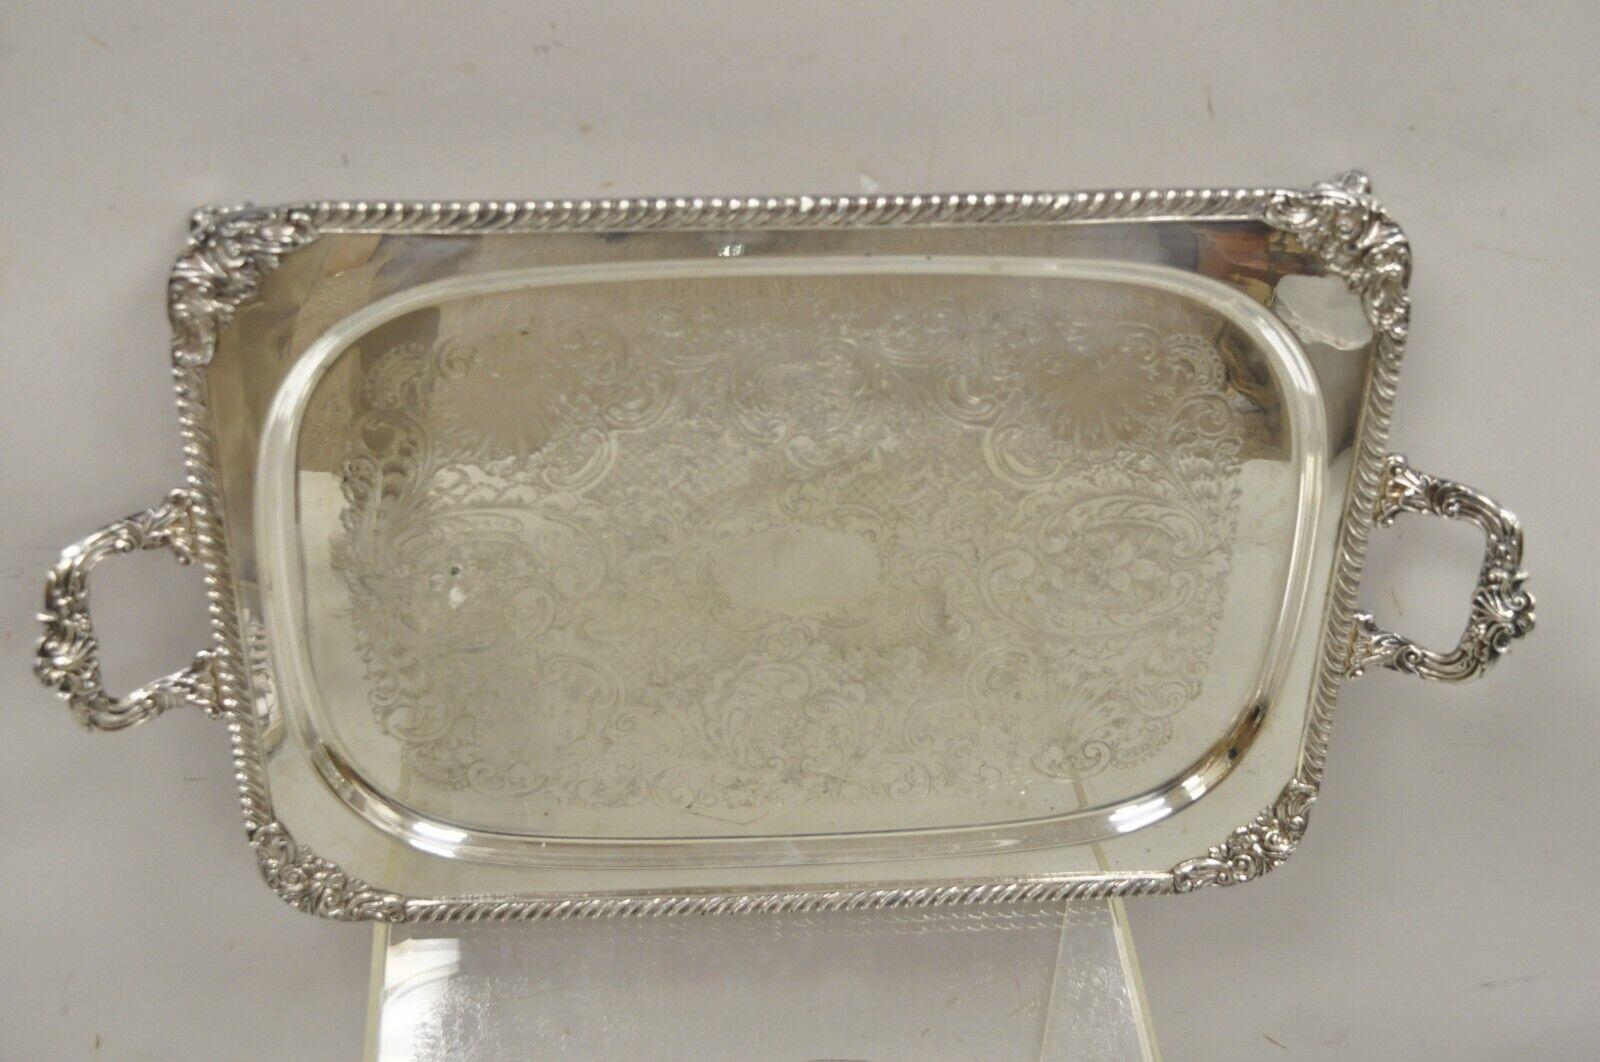 Ornate English Victorian Twin Handle Heavy Silver Plate Platter Tray For Sale 7